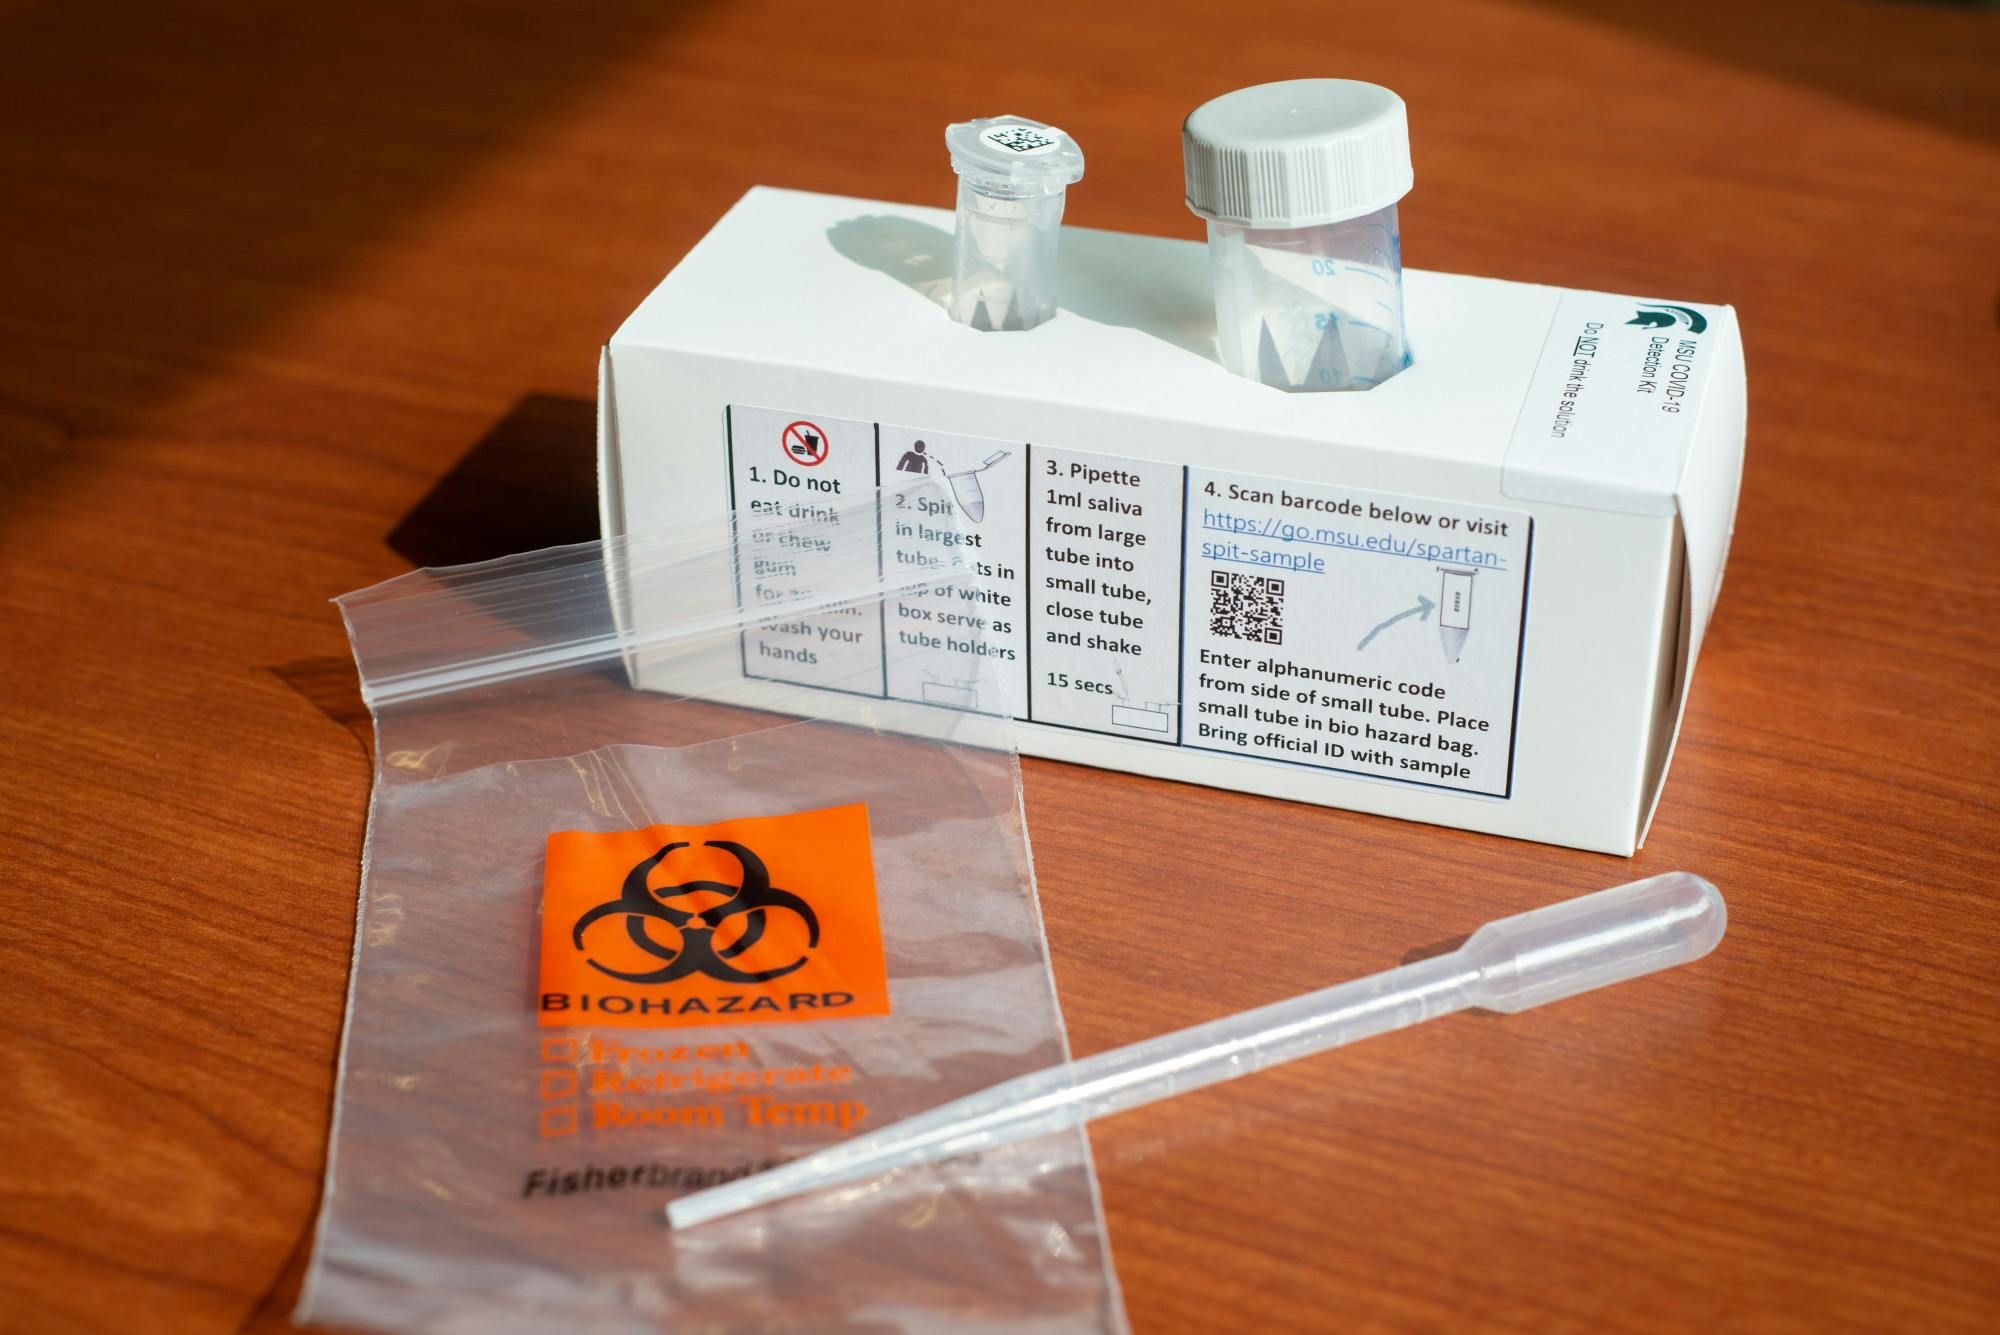 A cardboard box holds two collection tubes. In front of the box is a bag labeled 'Biohazard.'